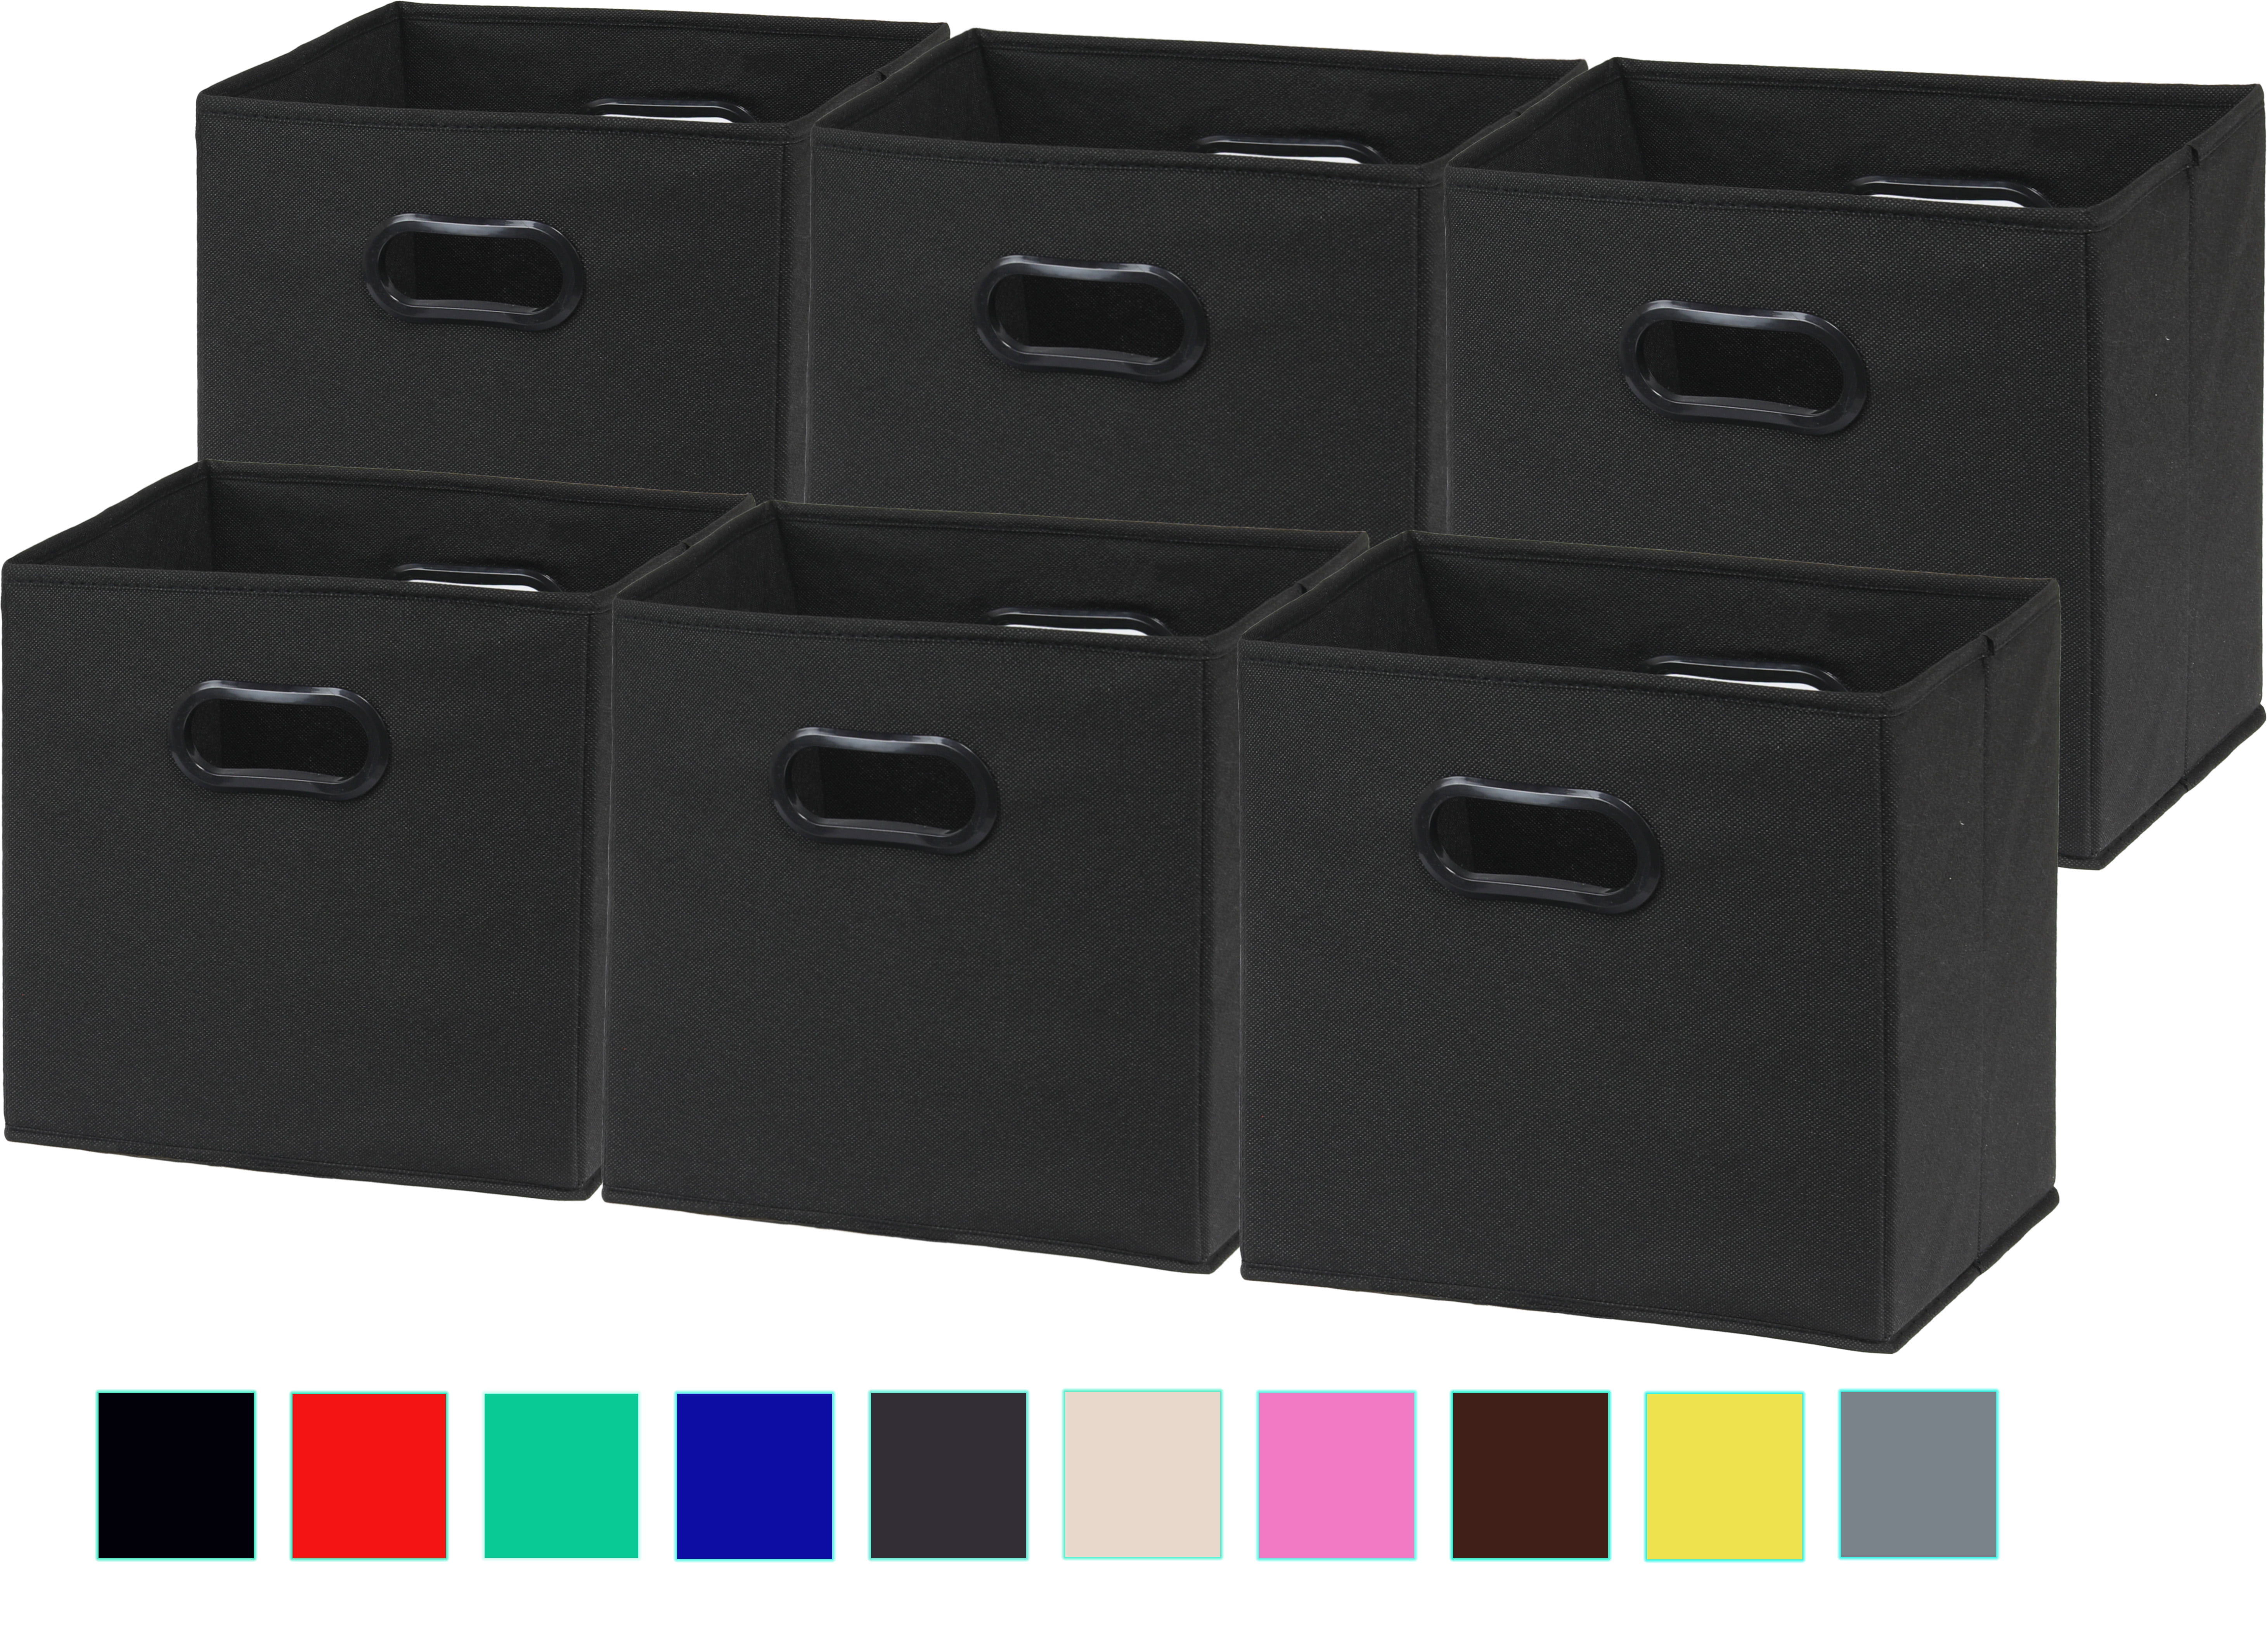 Dropship 6 Pack Fabric Storage Cubes With Handle, Foldable 11 Inch Cube Storage  Bins, Storage Baskets For Shelves, Storage Boxes For Organizing Closet Bins  to Sell Online at a Lower Price